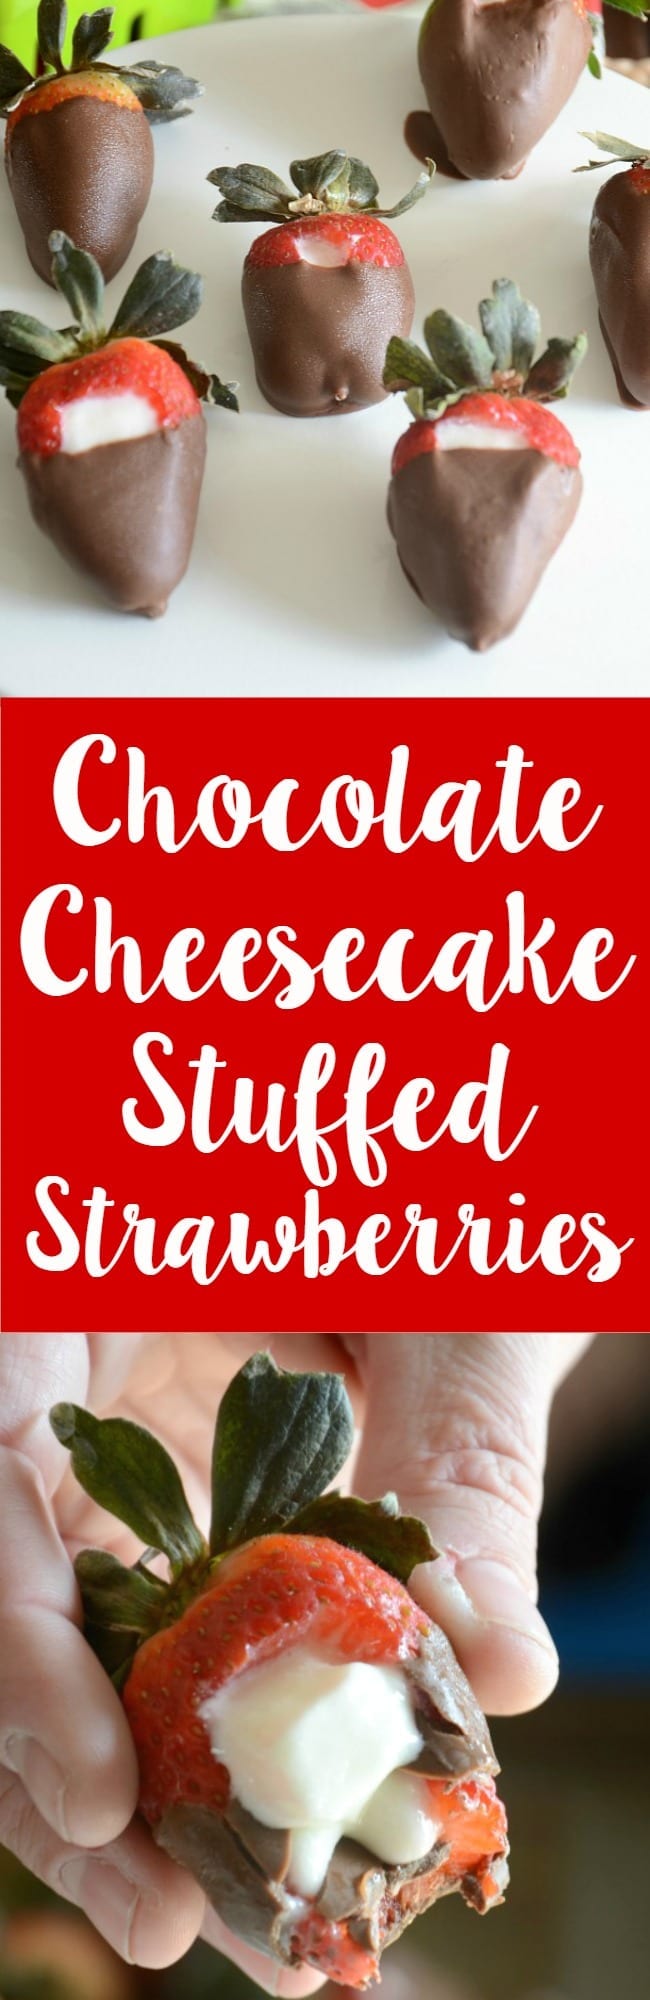 Easy and so yummy - chocolate covered cheesecake stuffed strawberries! Make these for your sweetie (or yourself!) today!